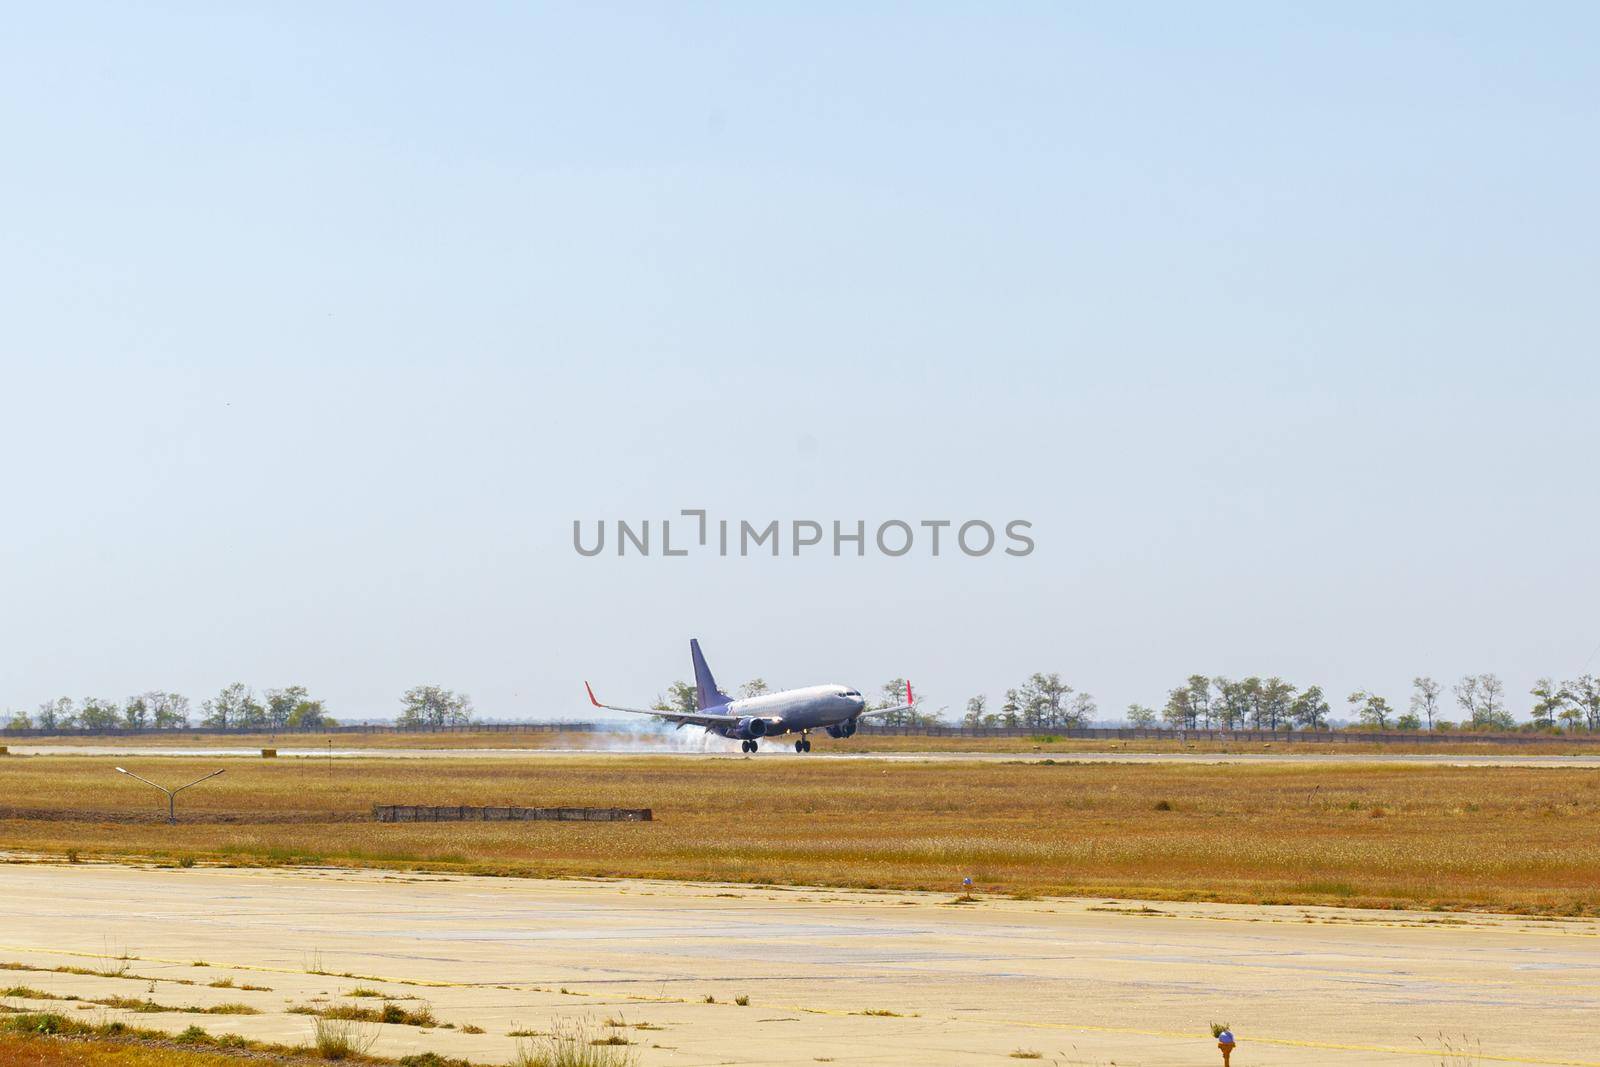 Passenger plane taking off from runway at airport on sunny day. by Fabrikasimf